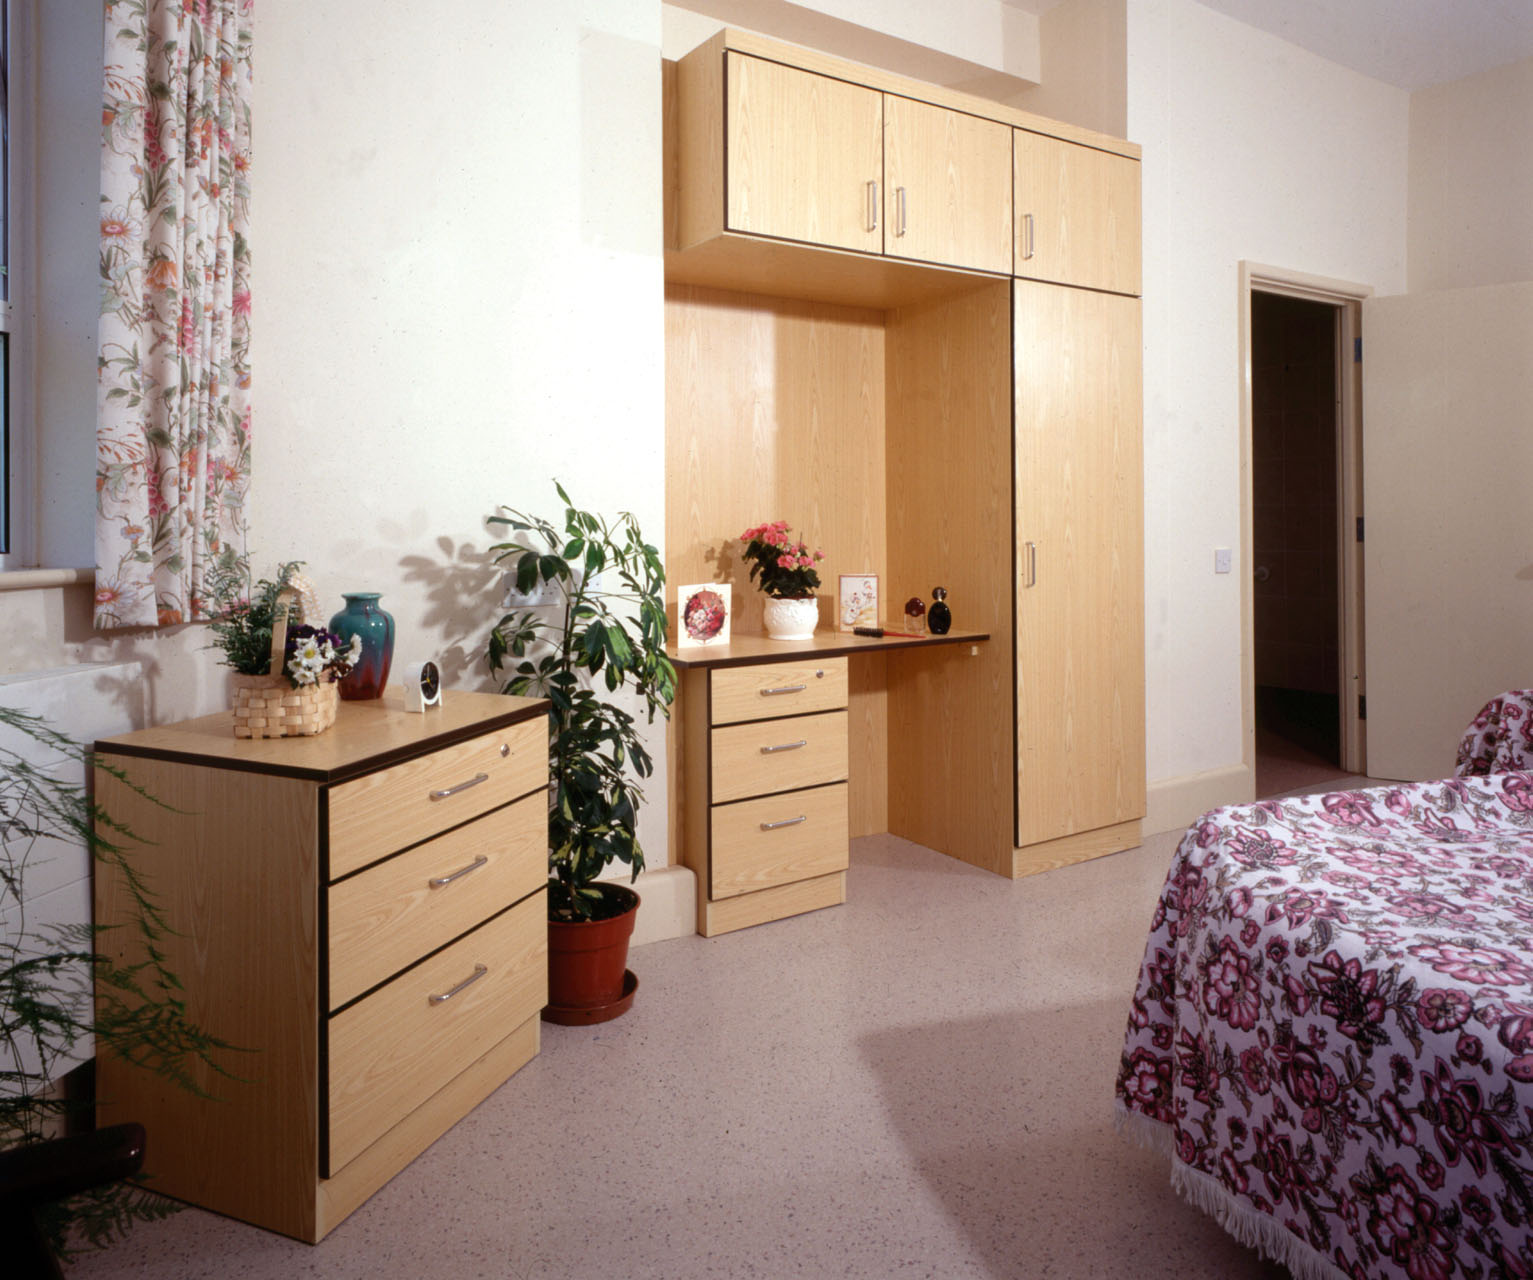 David Bailey relaunches bedroom furniture range for care homes and hospitals